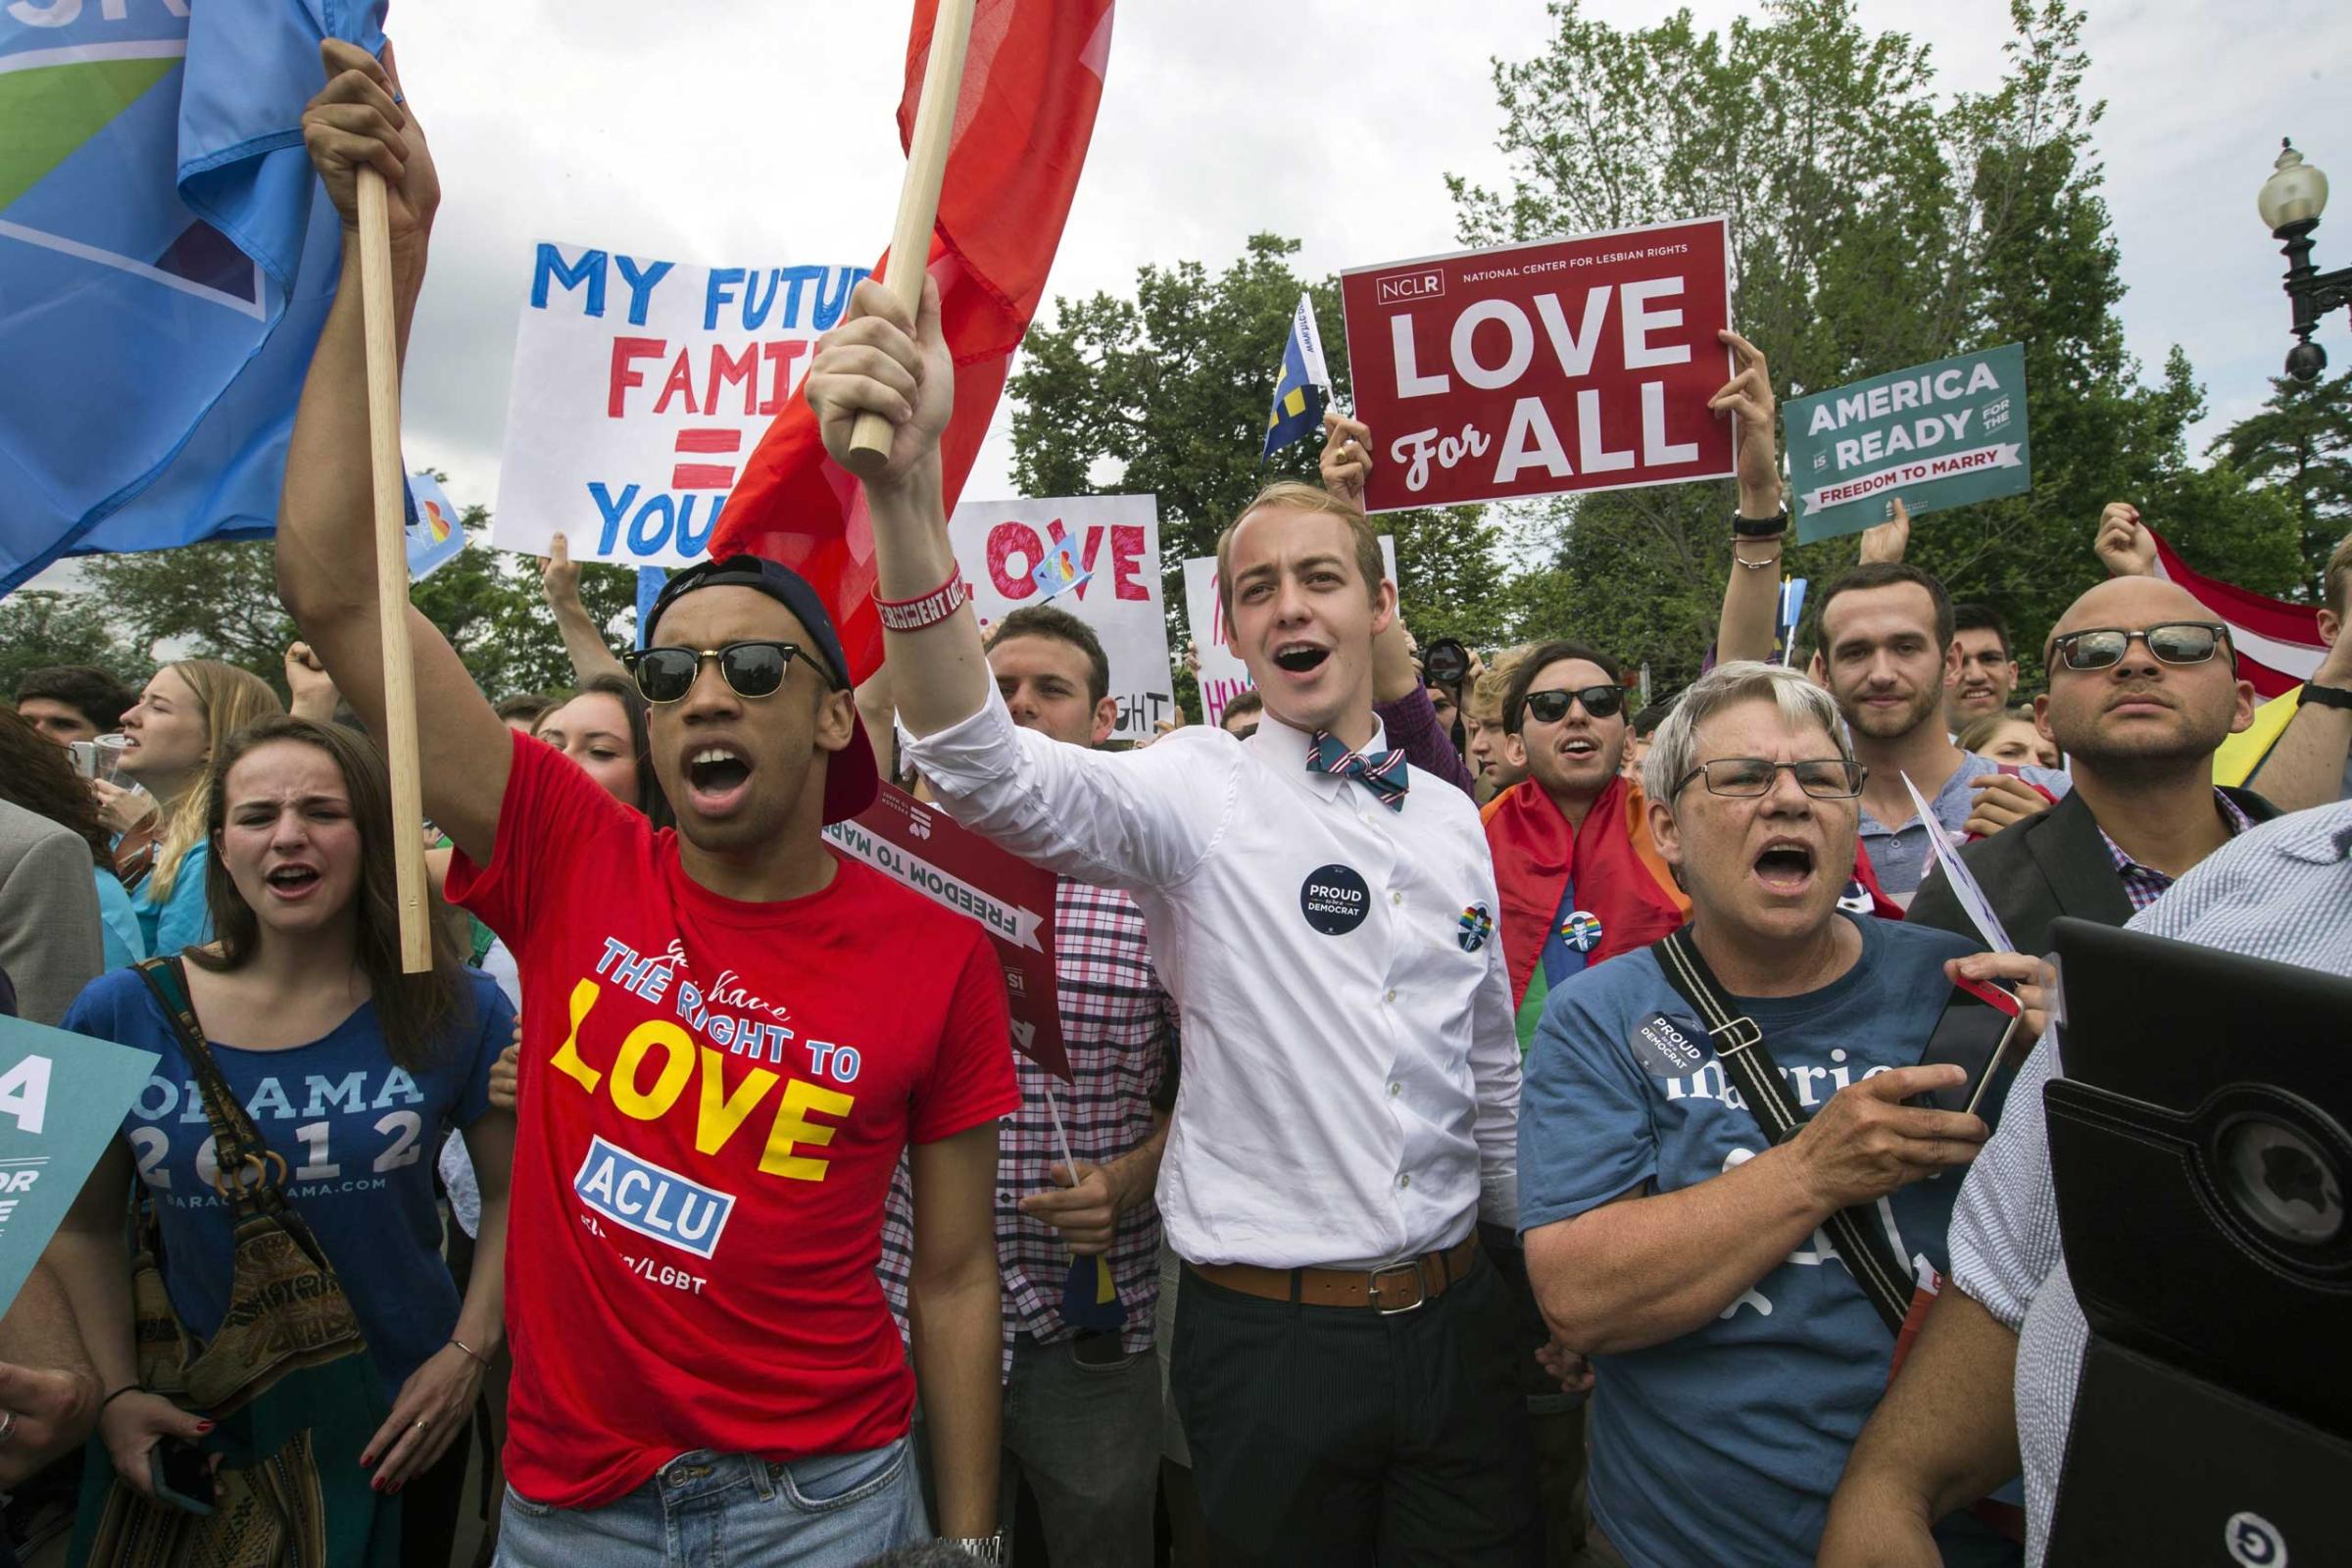 Supreme Court Rules in Favor of Gay Marriage